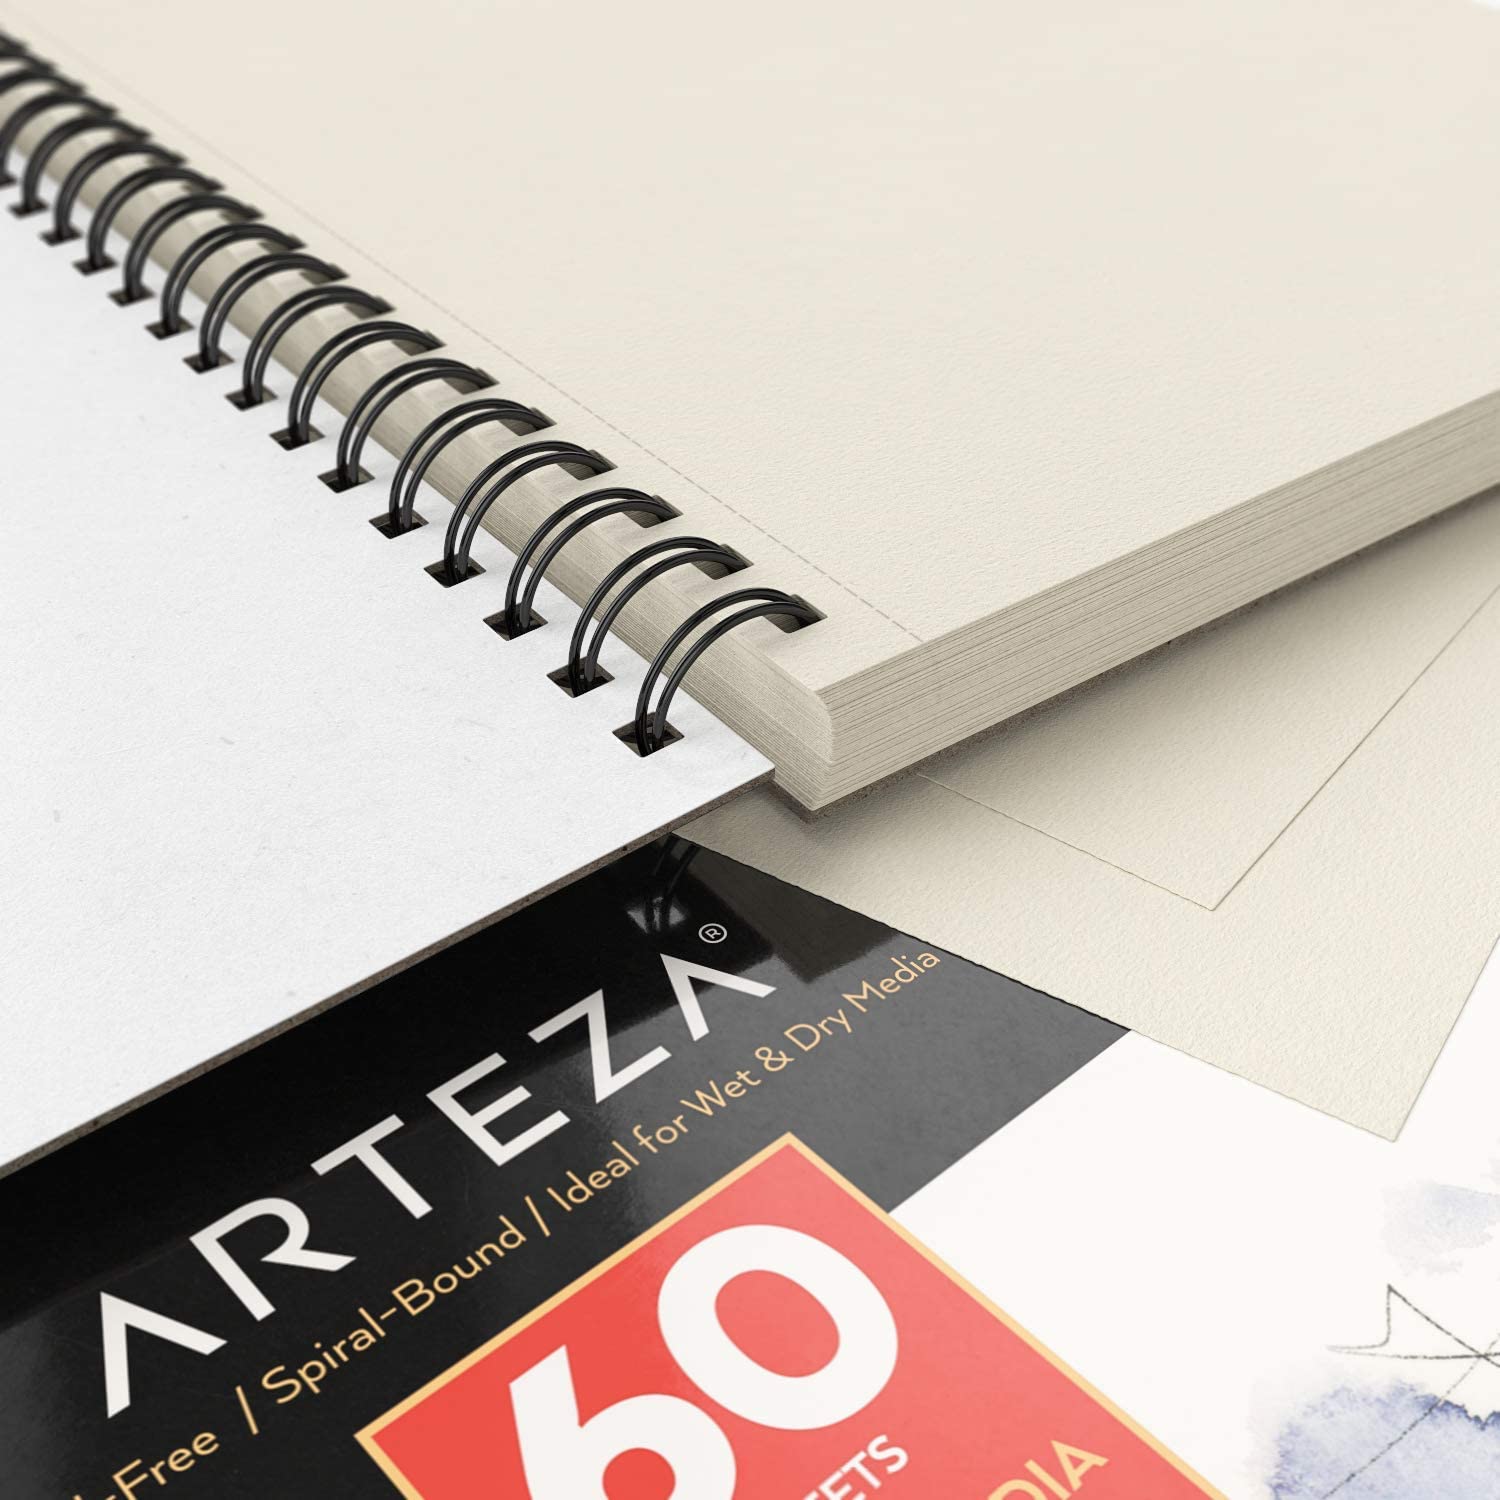 ARTISTO Premium Mixed Media Sketchbooks: Pack of 2 (120 Sheets), 9x12  inches, 160 GSM, Spiral Bound Sketch Pads, Suitable for a Variety of Wet  and Dry